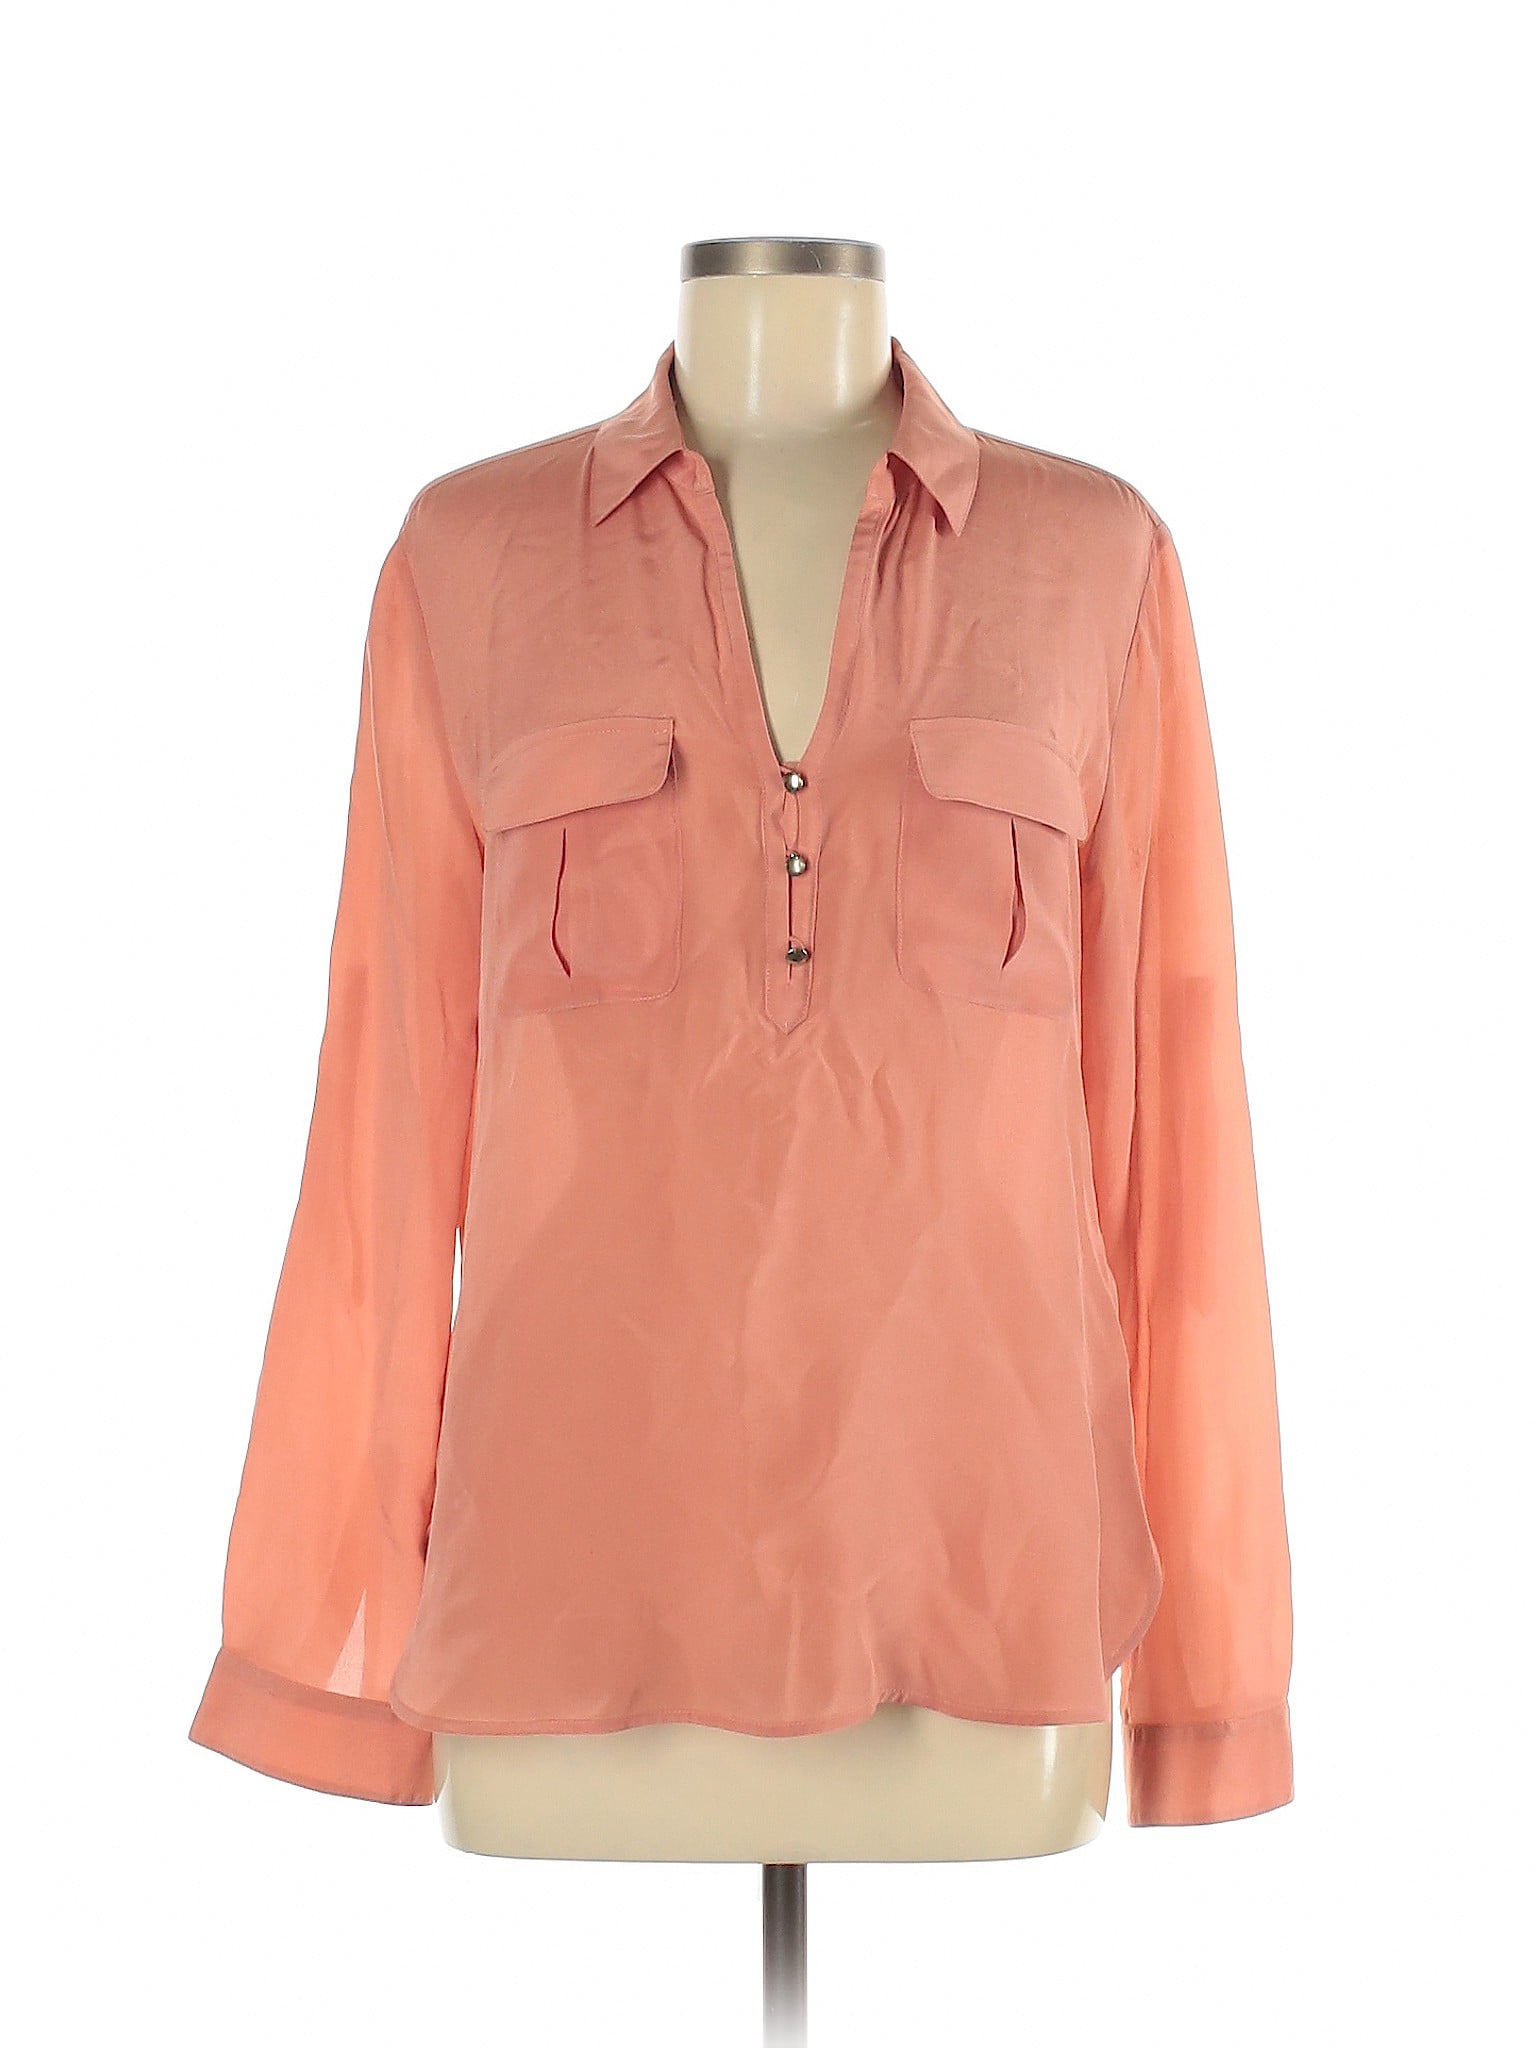 Pre-Owned Banana Republic Heritage Collection Women's Size M - Walmart ...